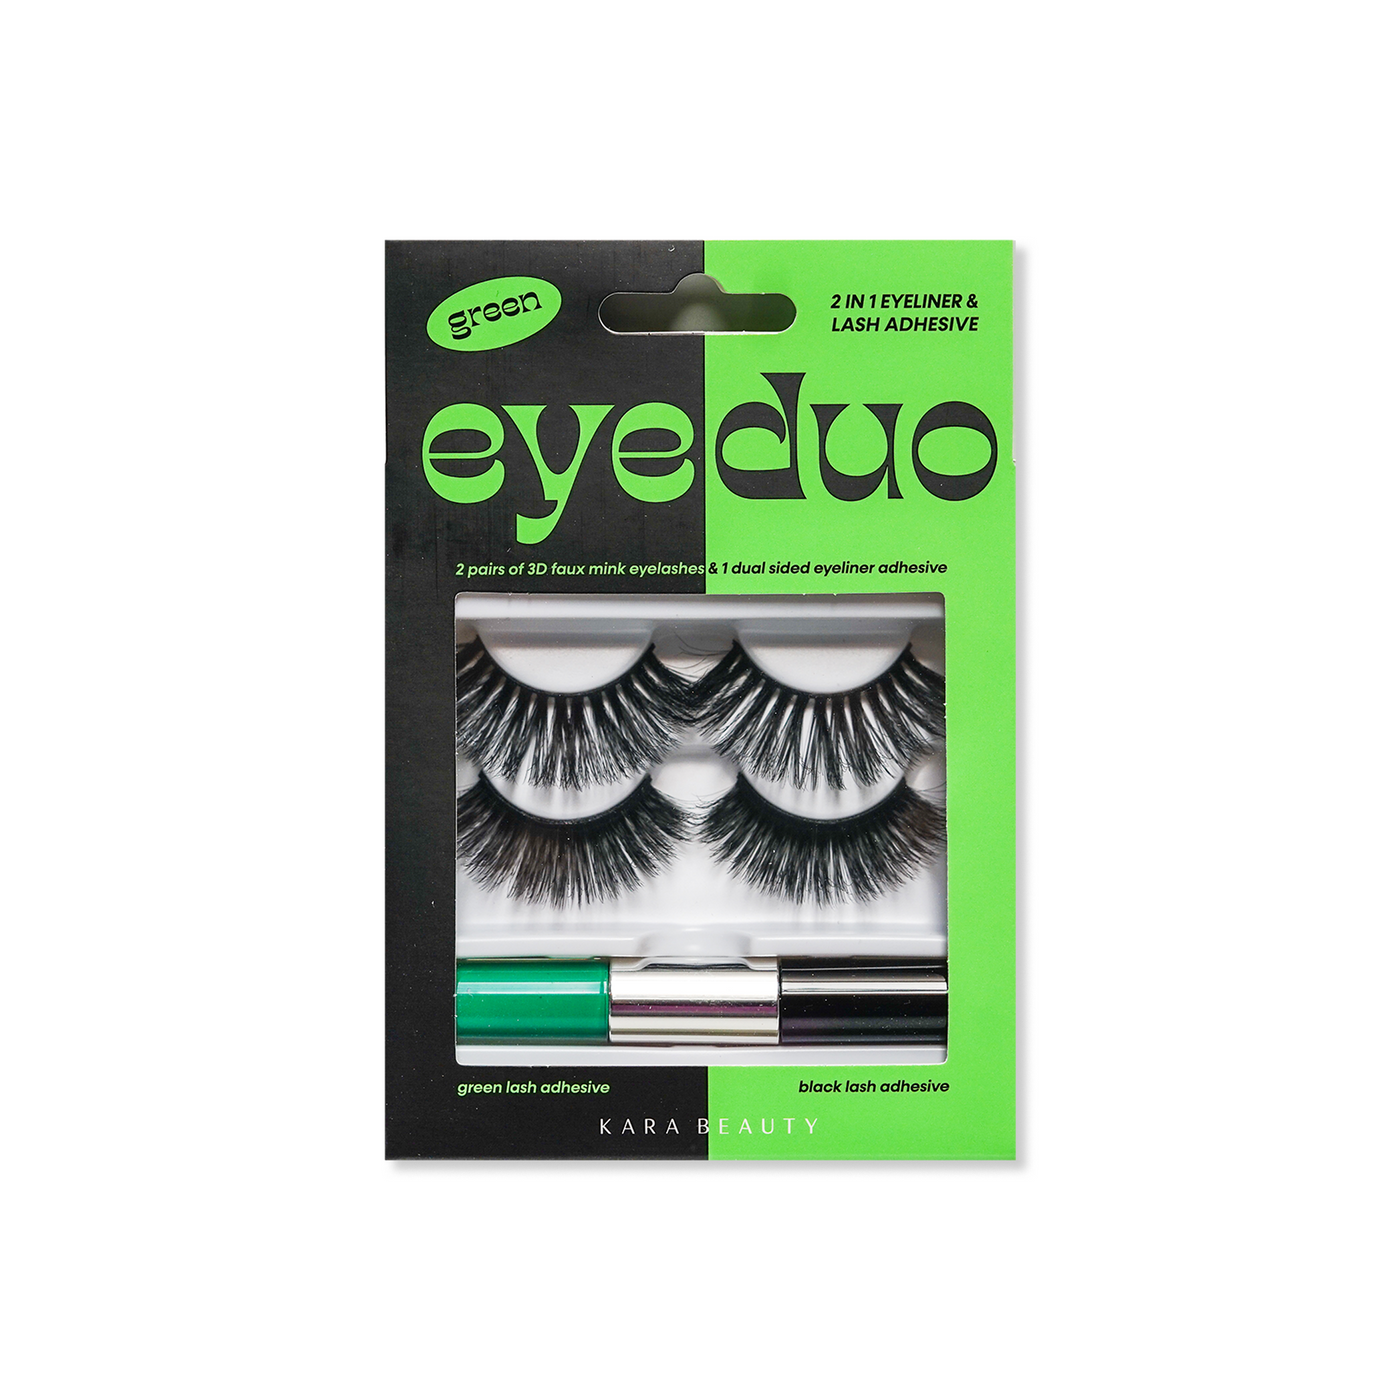 Kara Beauty's Eye Duo 2 Assorted Lashes and 2-in-1 Green and Black  Liner and lash adhesive